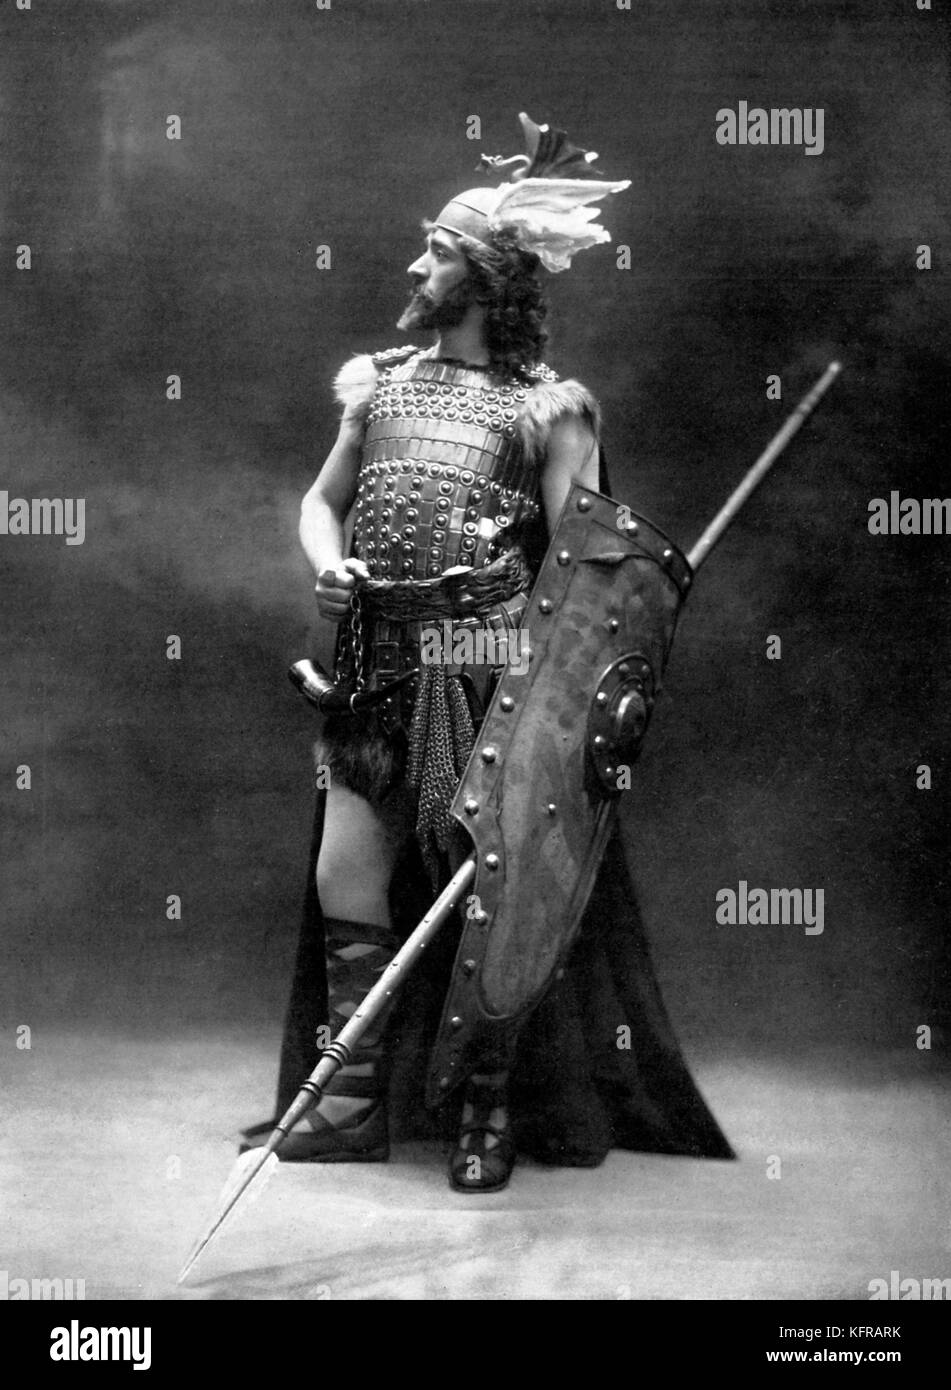 Götterdämmerung [The Twilight of the Gods] by Richard Wagner, fourth opera in  Der Ring des Nibelungen (The Ring of the Nibelung) cycle. With Dolmores in the role of Siegfried. Performed at Théâtre du Chateau d'Eau, Paris, France, 1902. RW: German composer & author, 22 May 1813 - 13 February 1883. Stock Photo